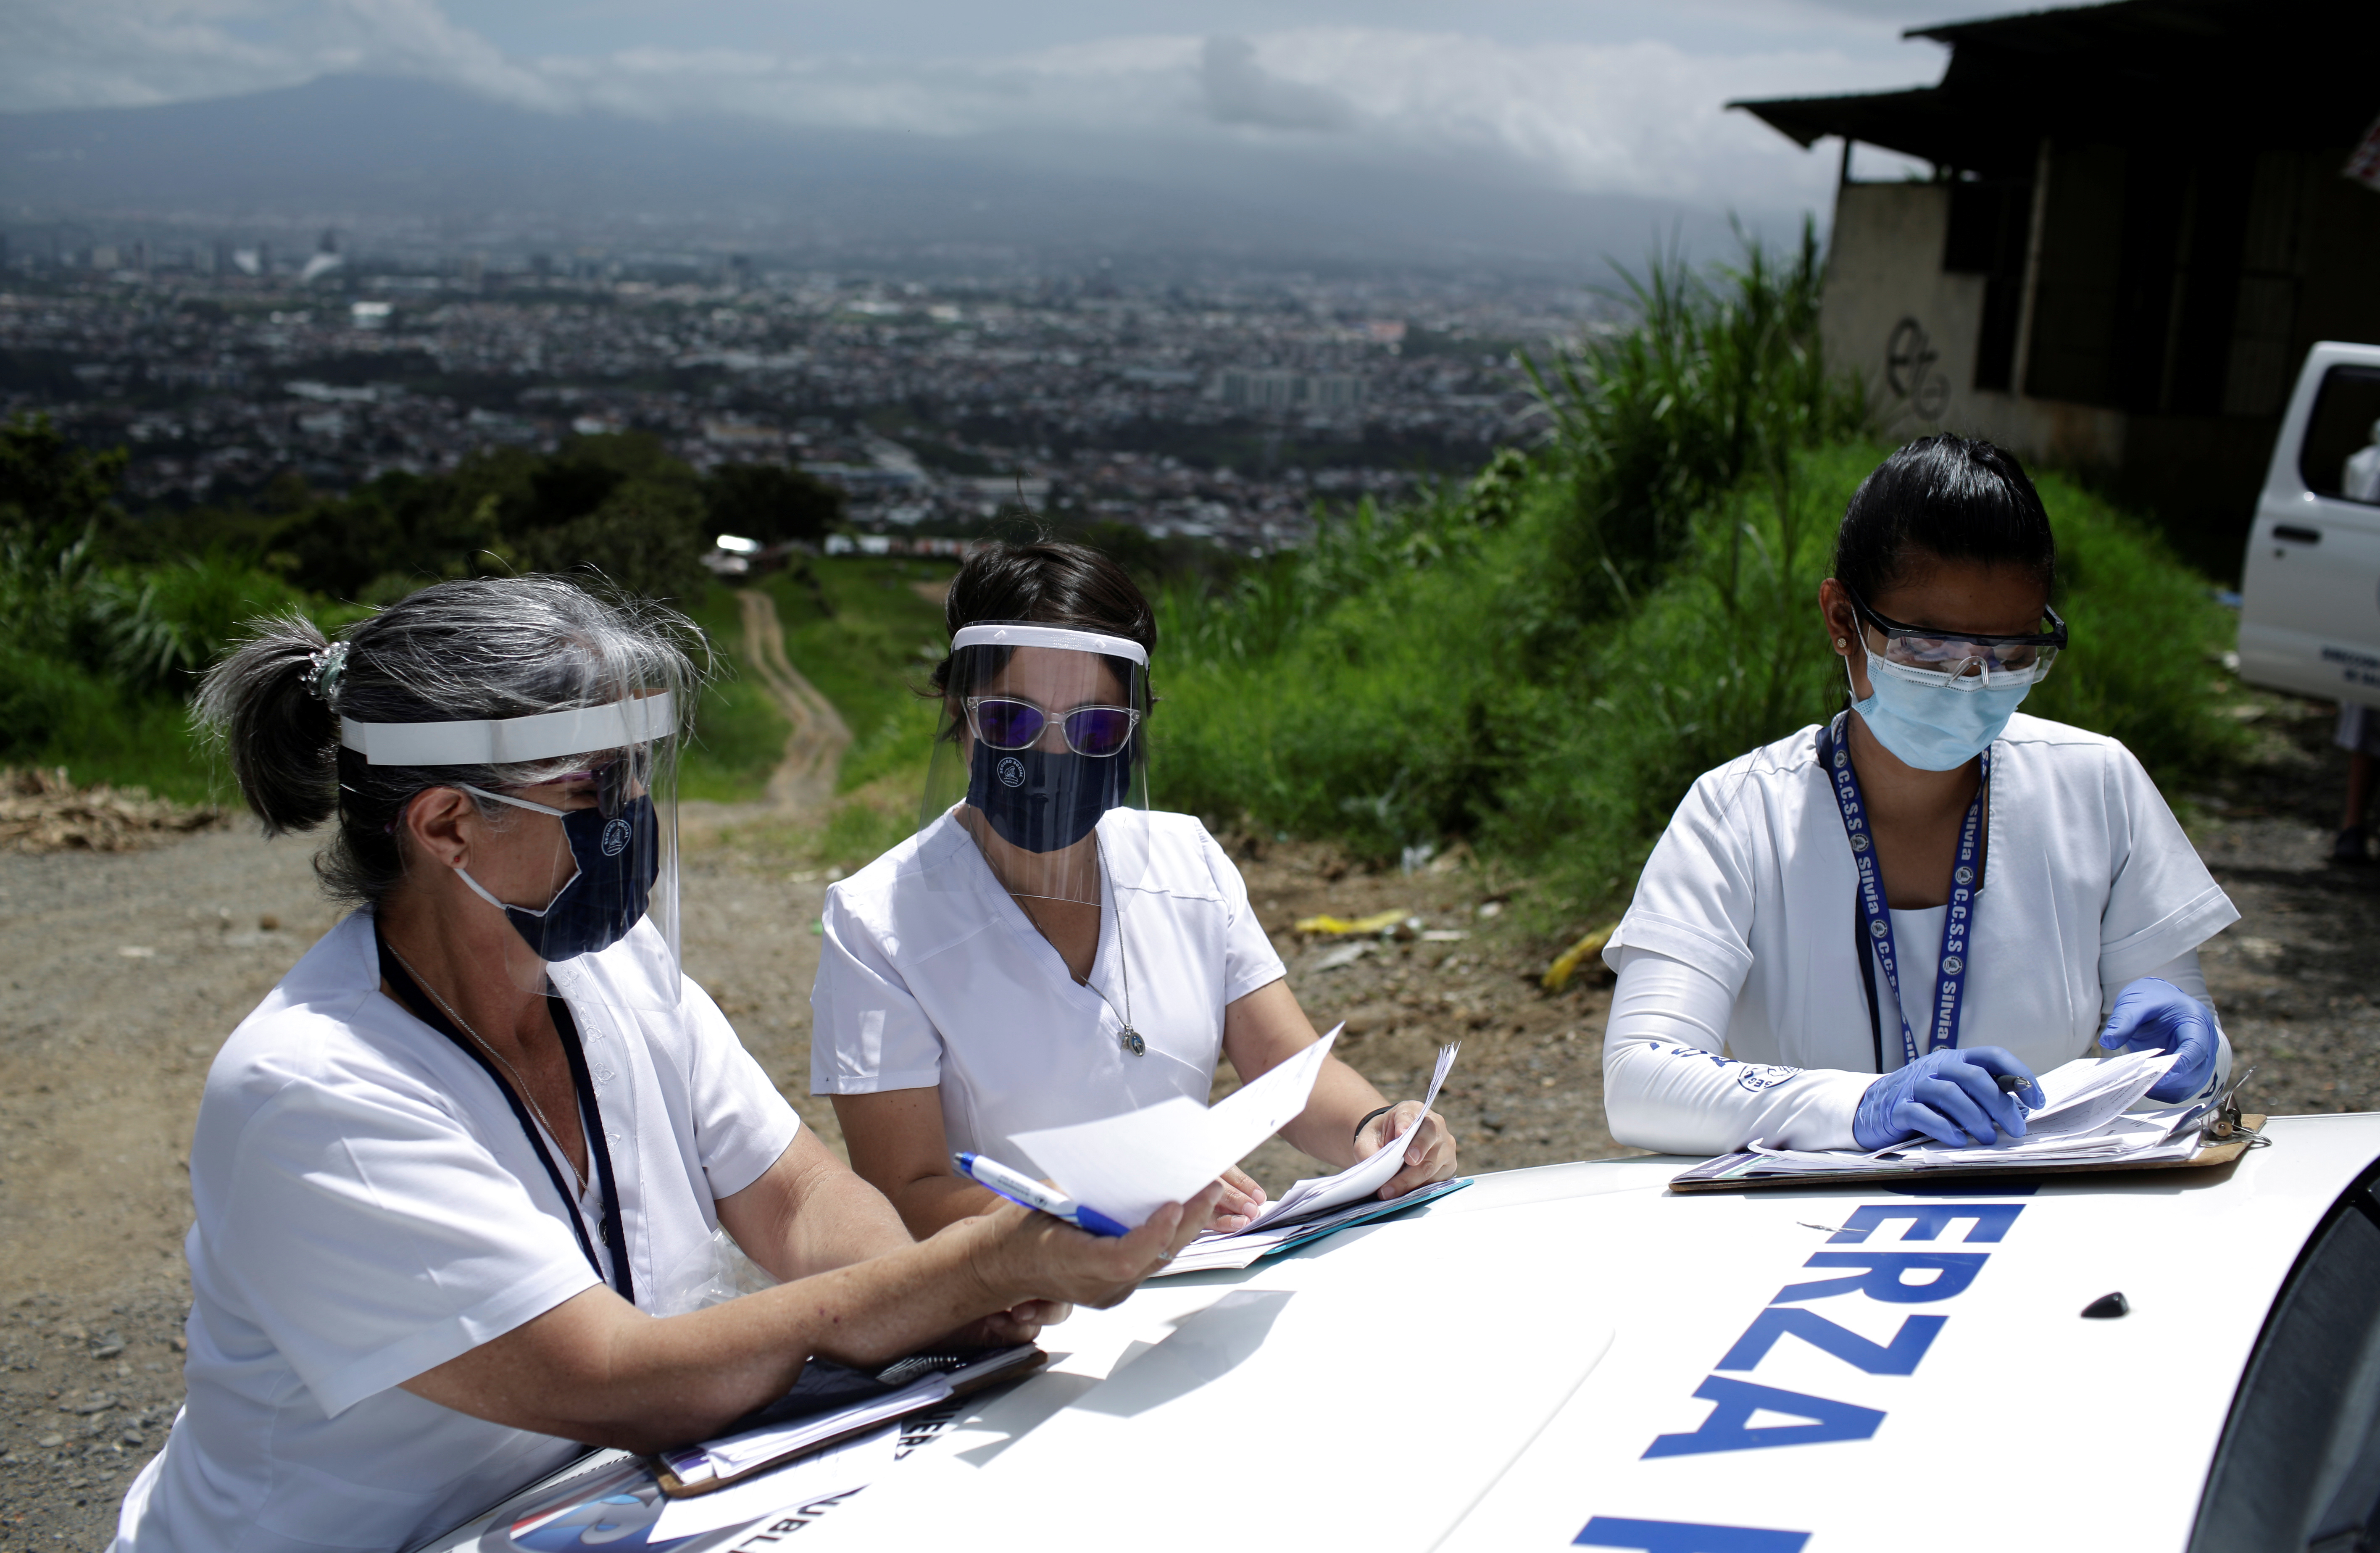 Health workers collect data from people who have been tested for COVID-19 in a densely populated, low-income area in San José, Costa Rica, July 7, 2020.